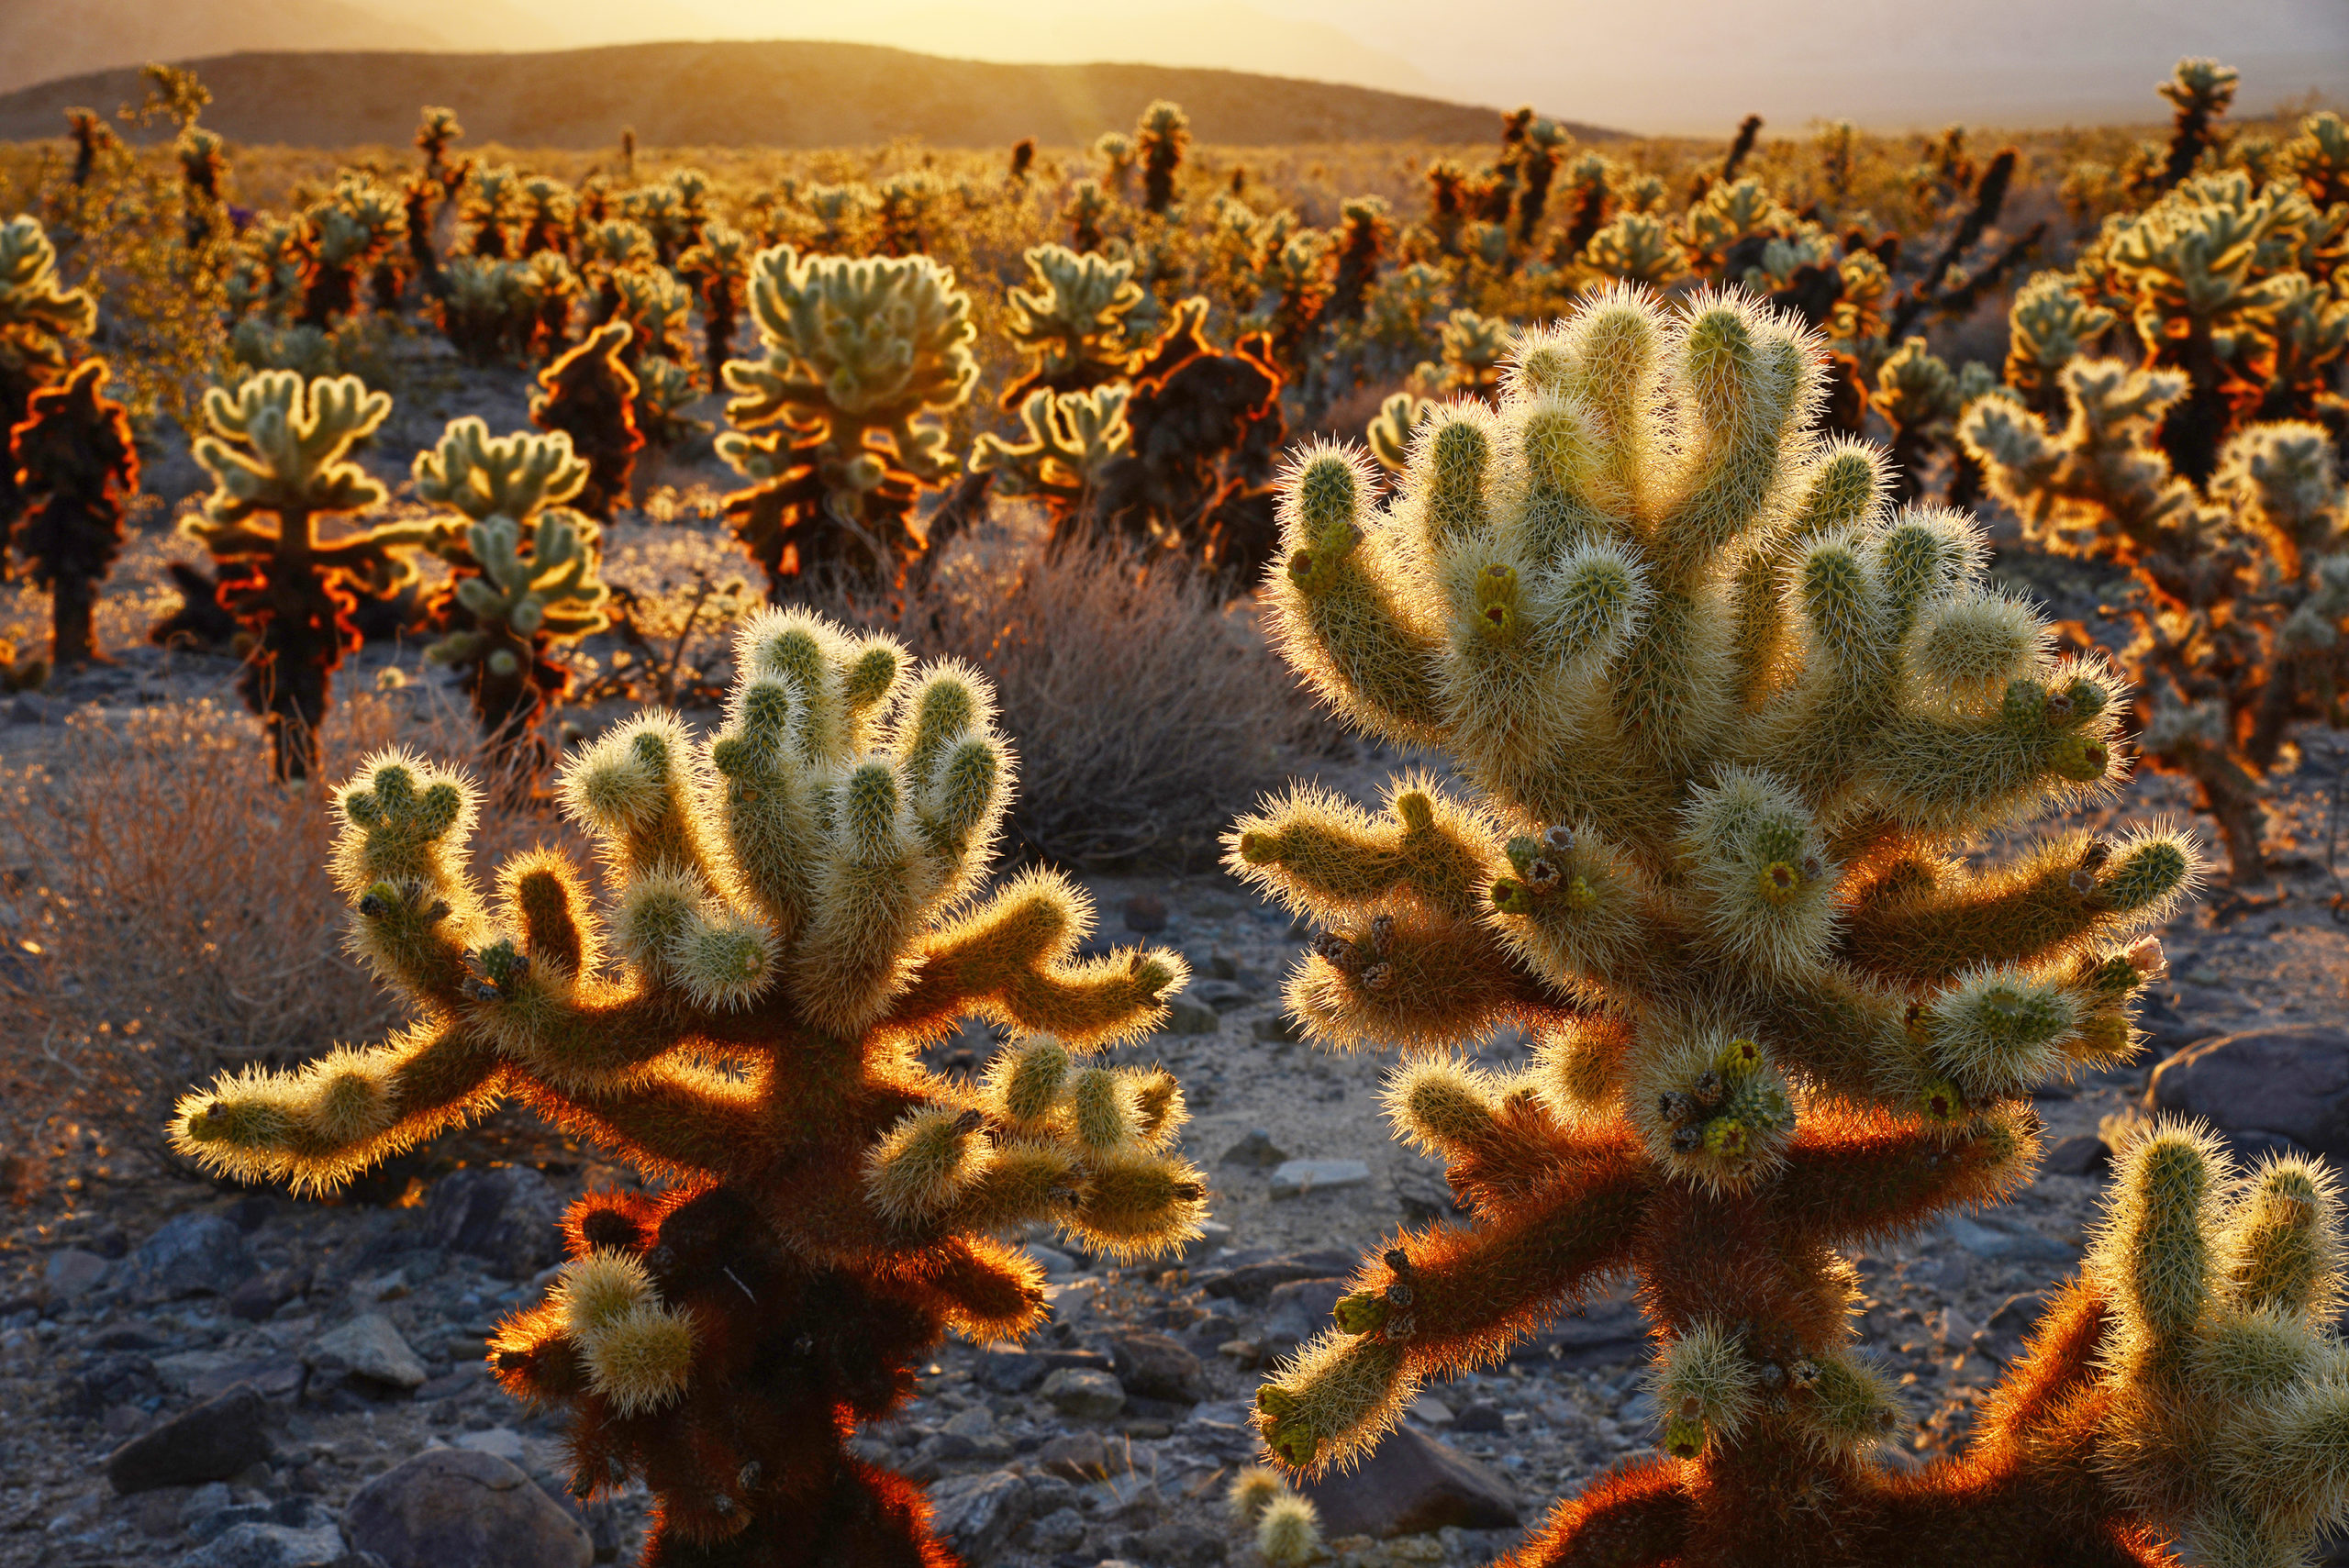 Cactuses at sunset in Joshua Tree National Park. 